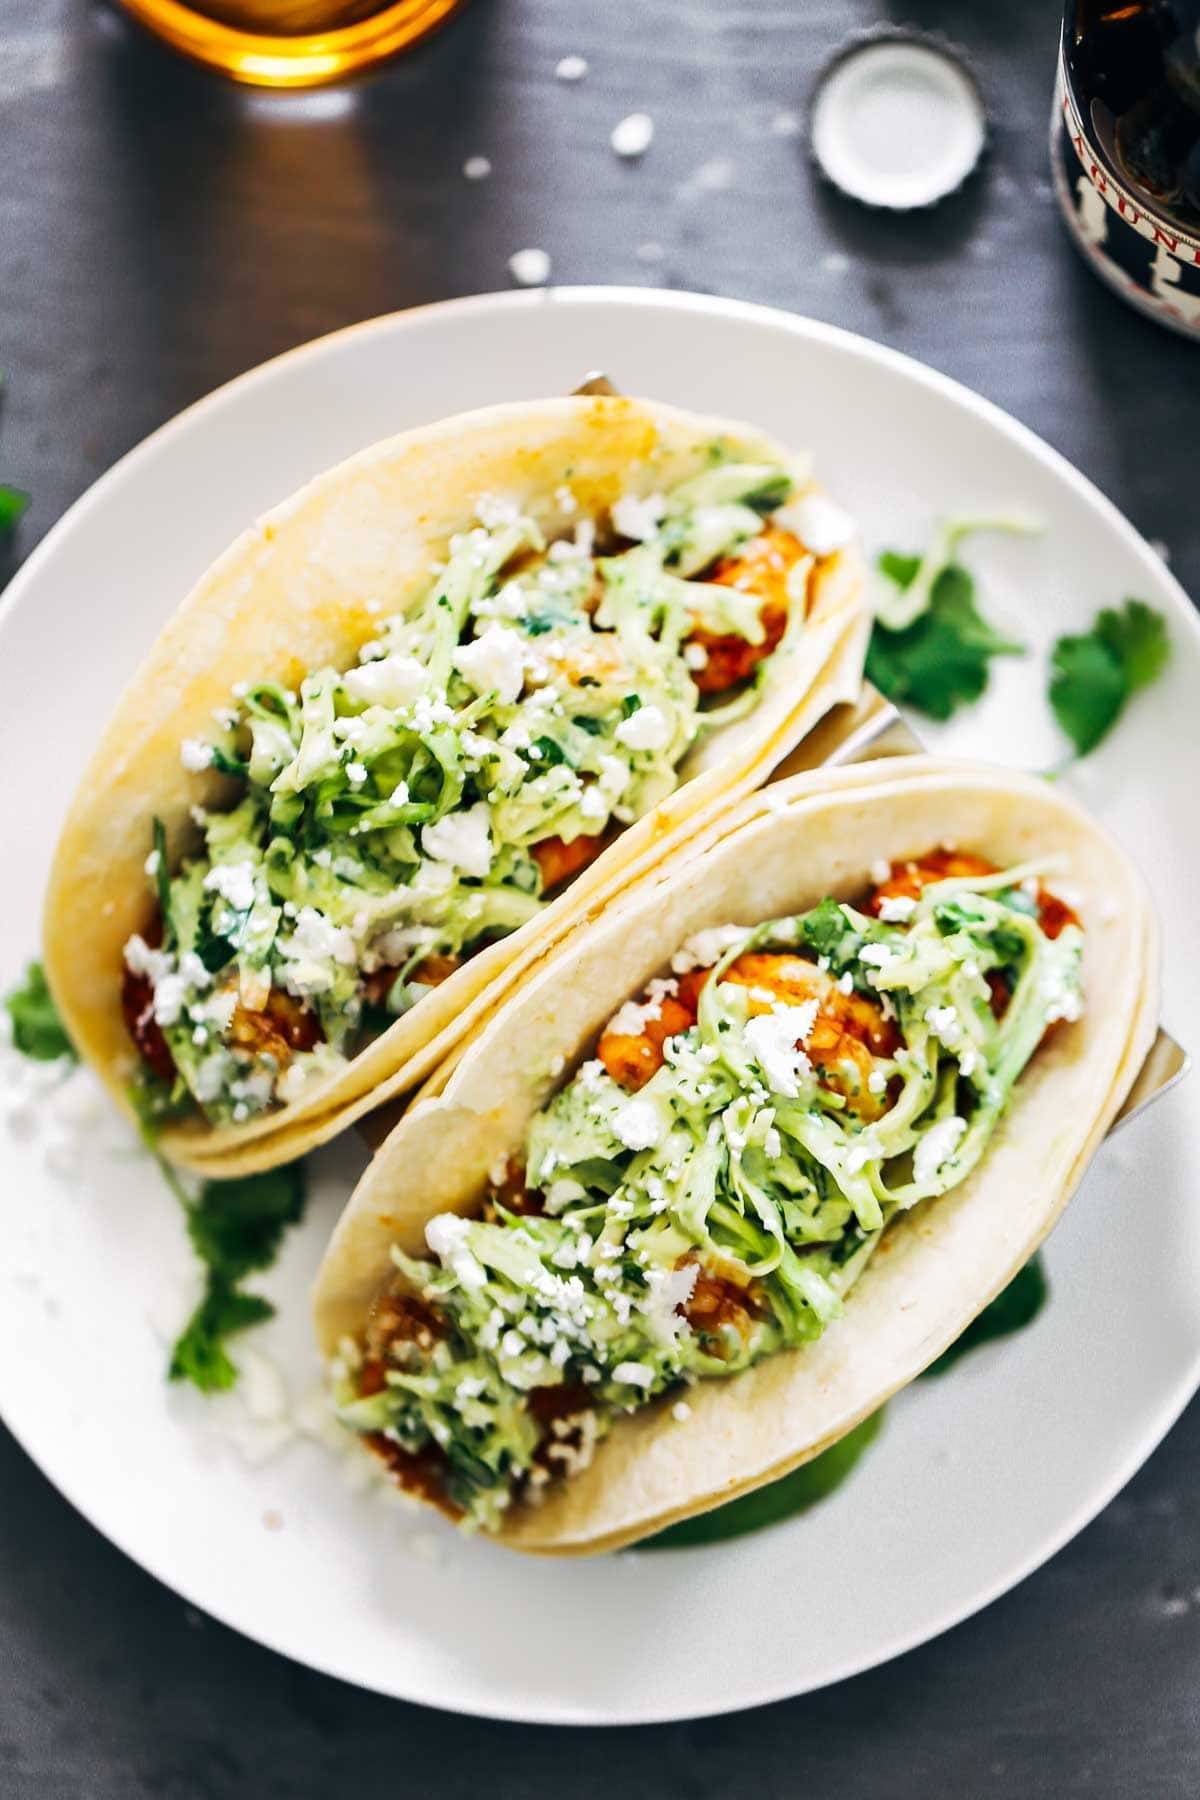 Spicy Shrimp Tacos with Garlic Cilantro Lime Slaw - ready in 30 minutes and loaded with avocado, spicy shrimp, and a homemade creamy lime slaw.  Best tacos I've ever had!